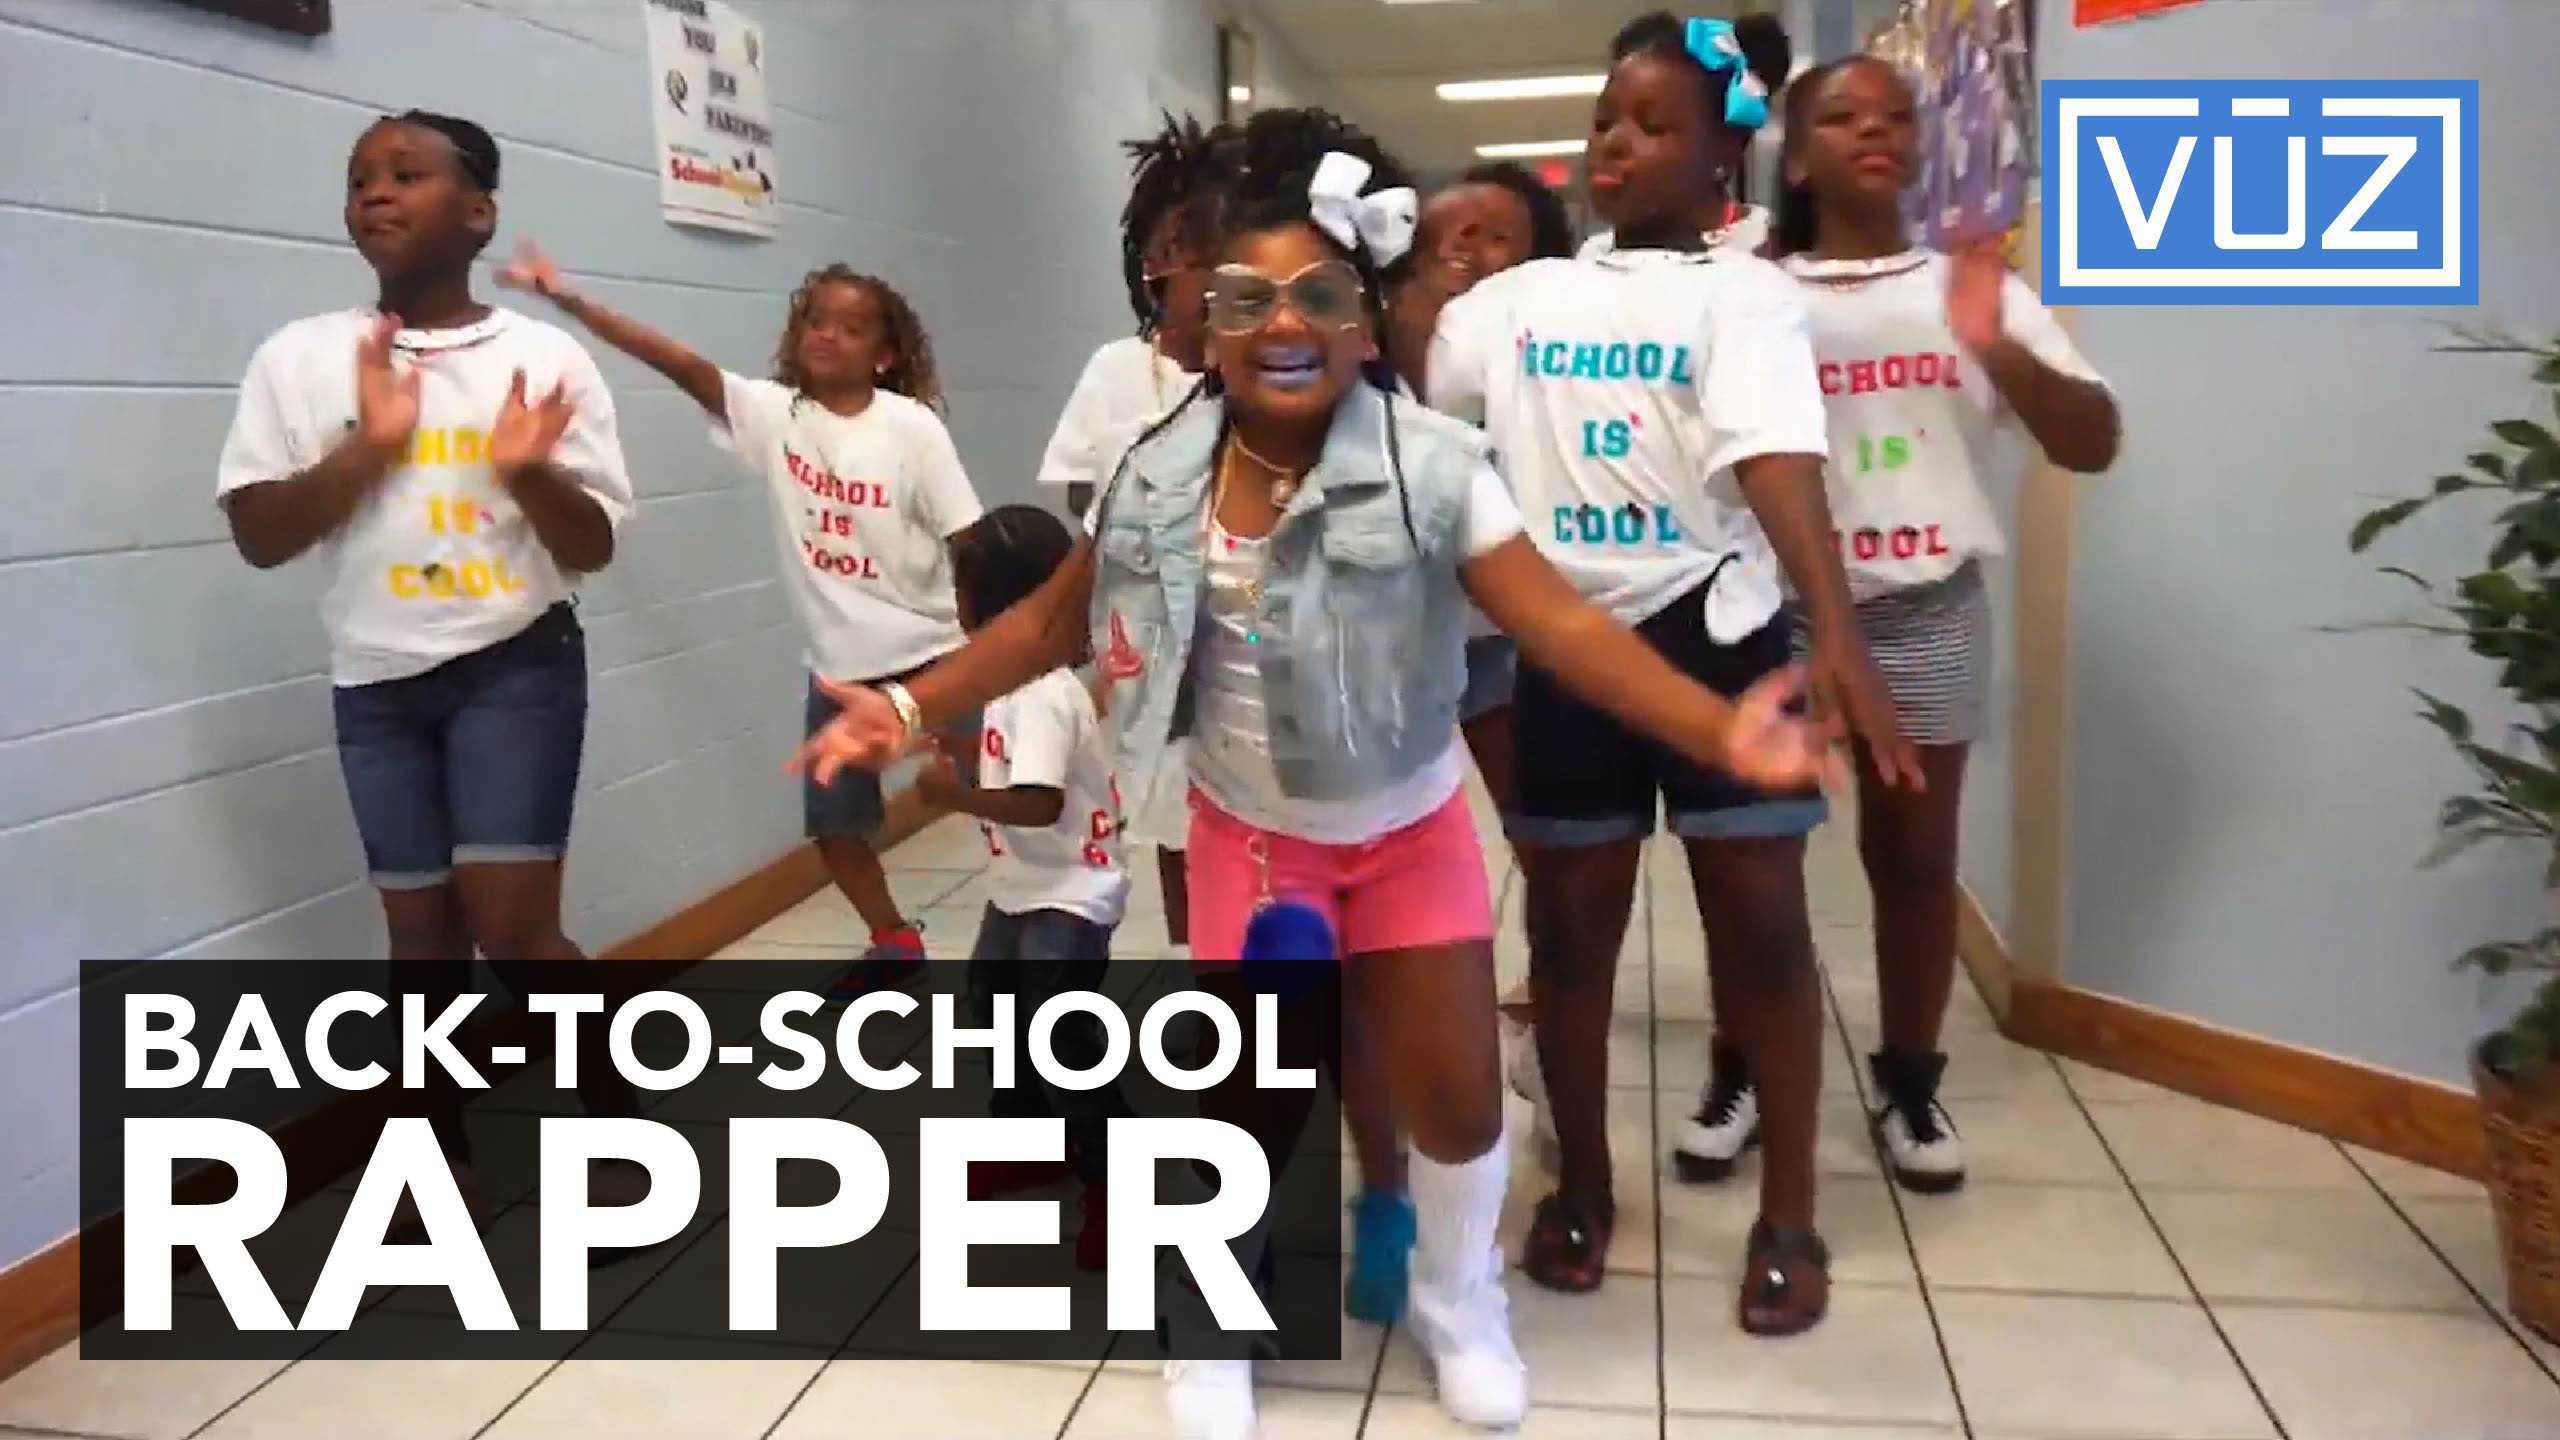 8-year-old makes rap video to promote going to school